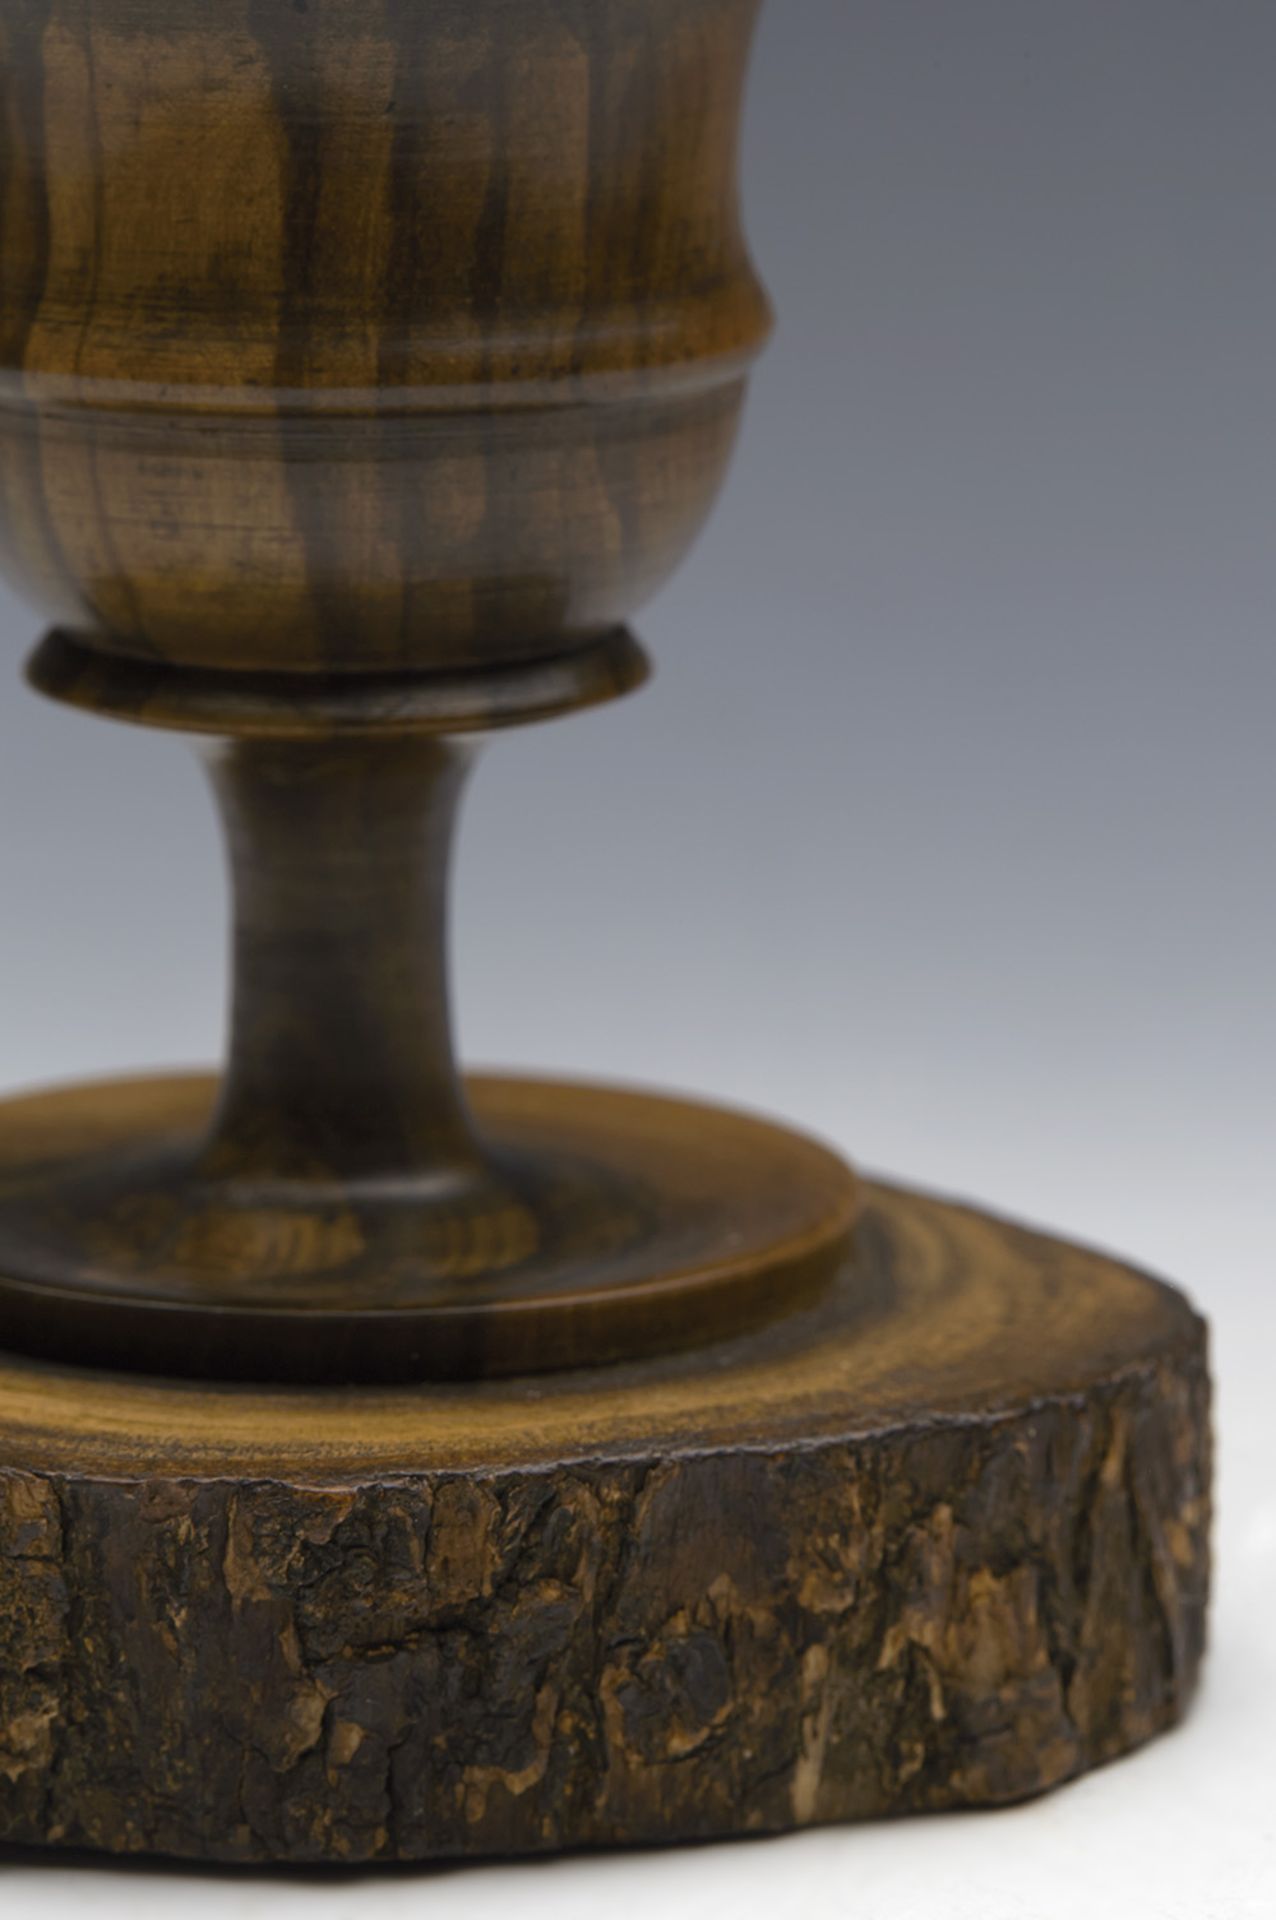 ANTIQUE FINELY HAND TURNED TREEN INKWELL 19TH C. - Image 5 of 7